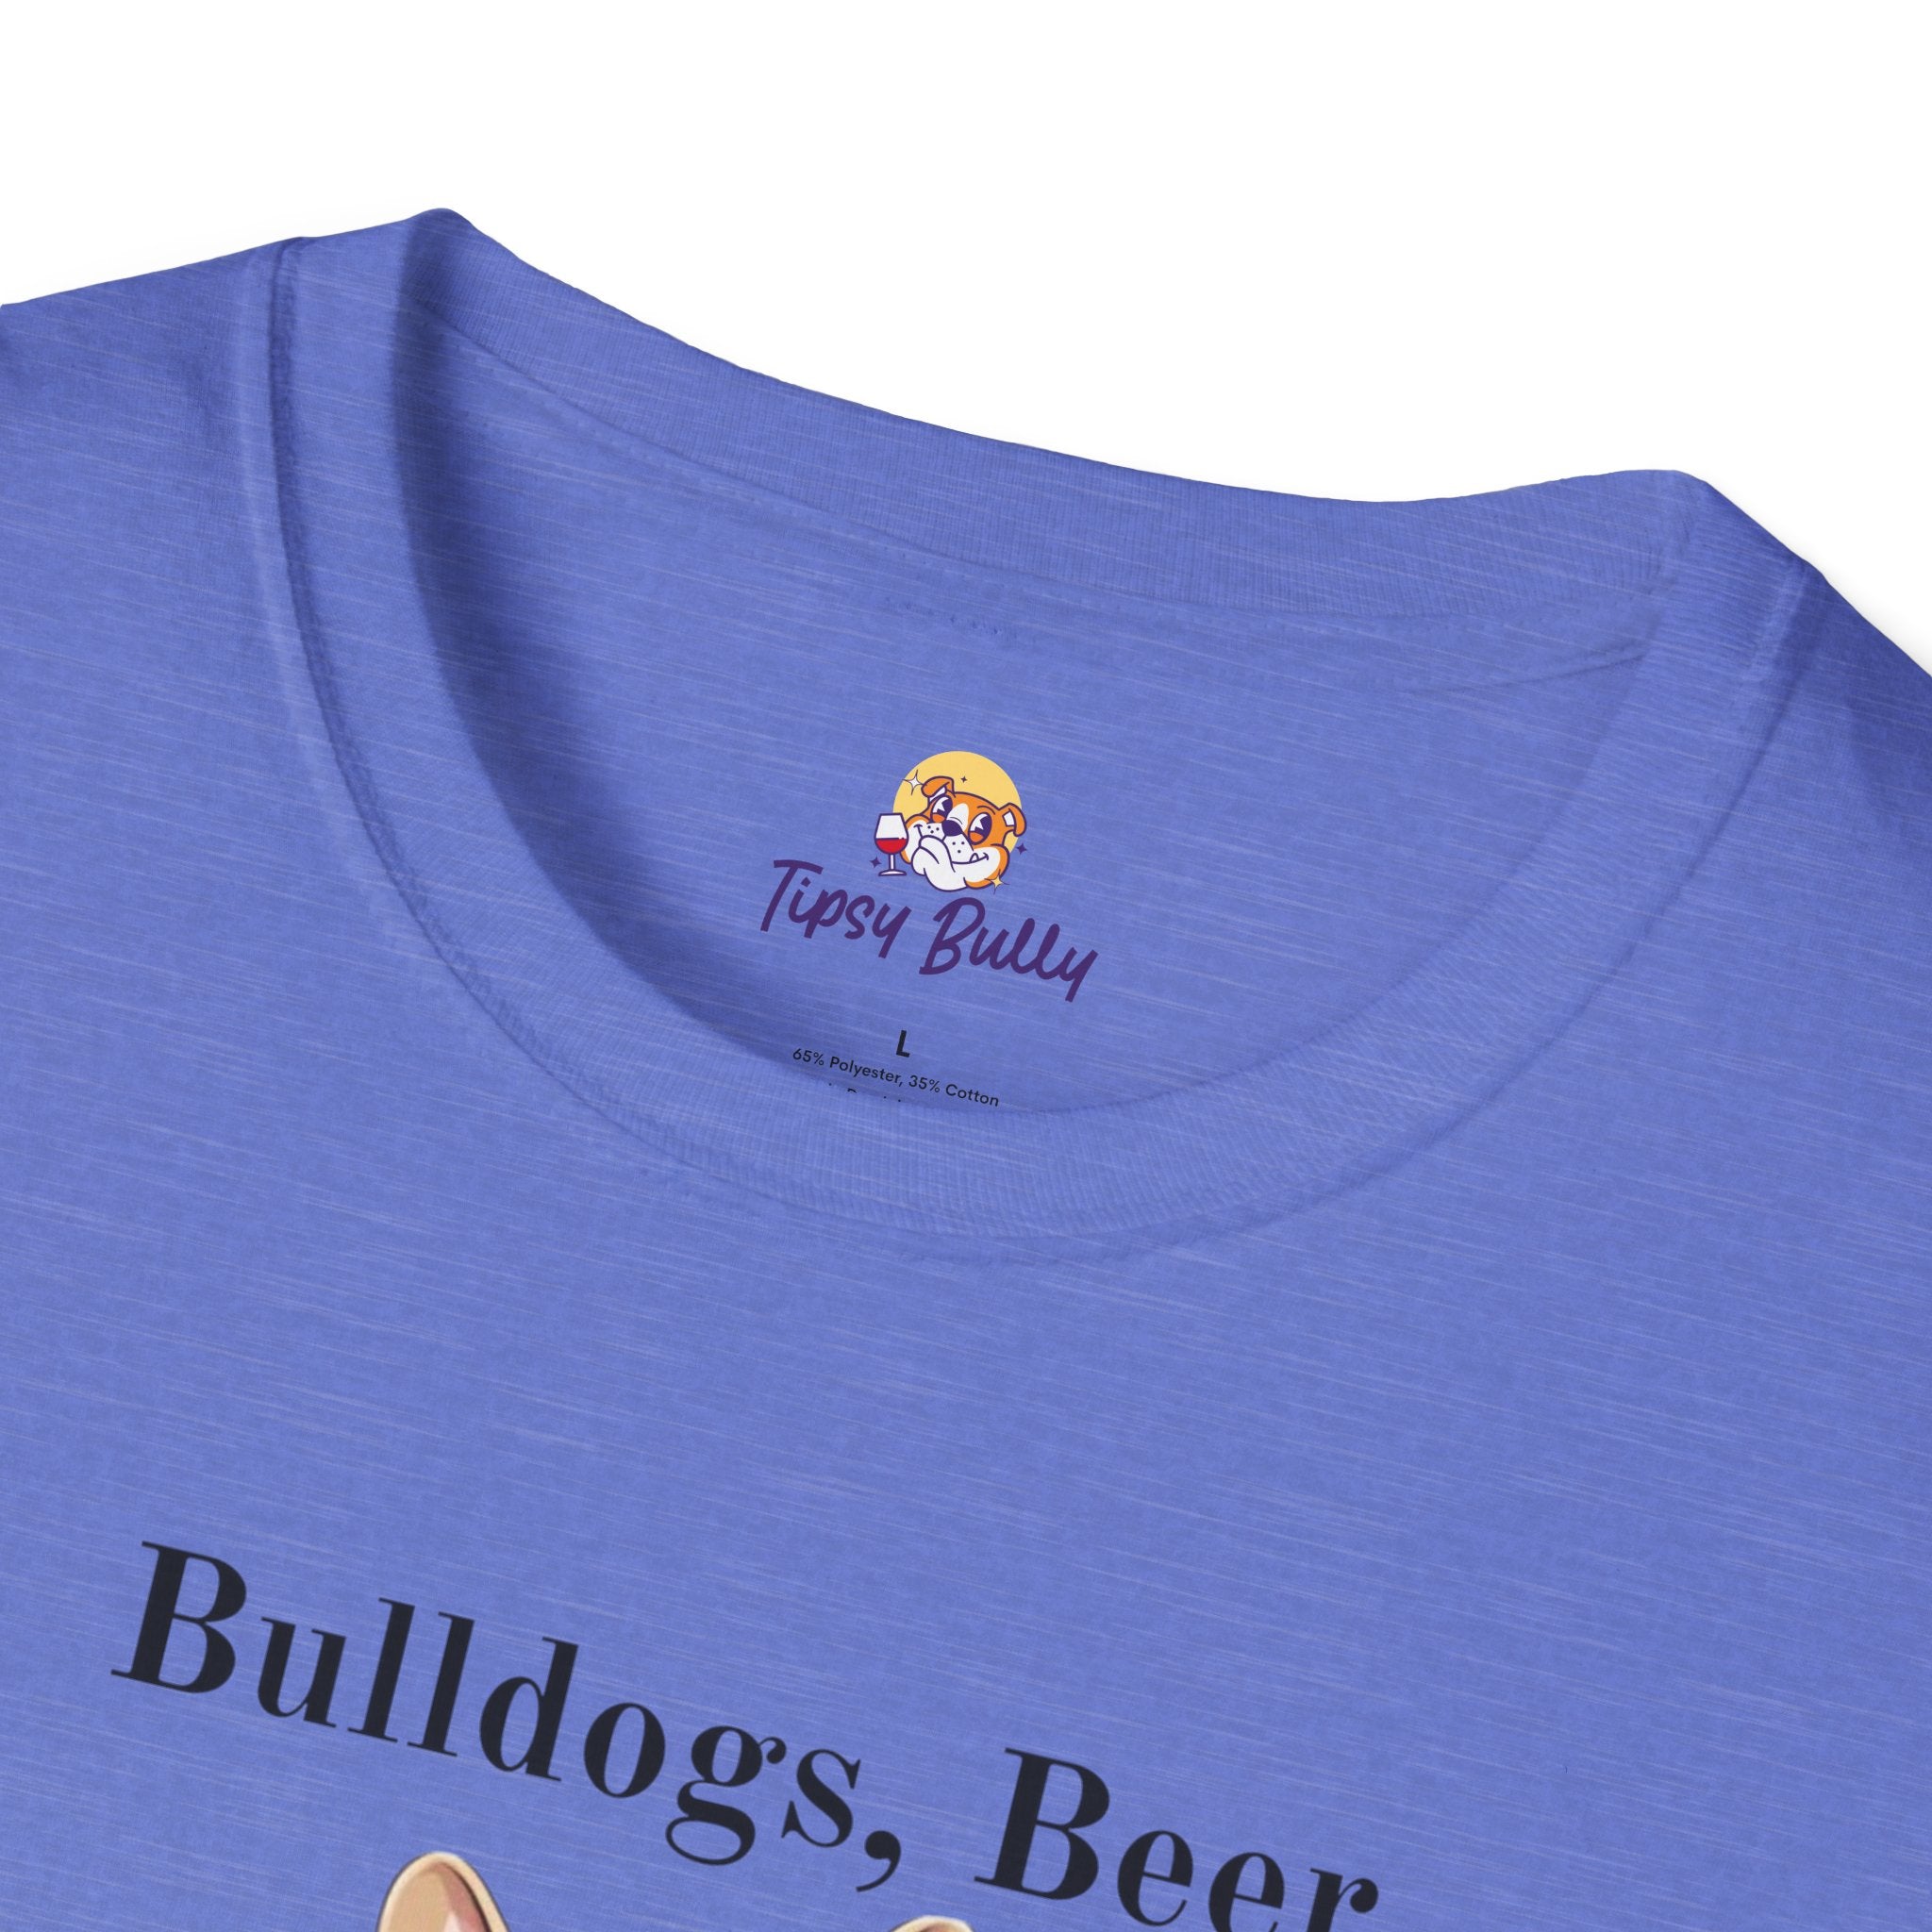 Bulldogs, Beer, and Bad Decisions" Unisex T-Shirt by Tipsy Bully (French/White)